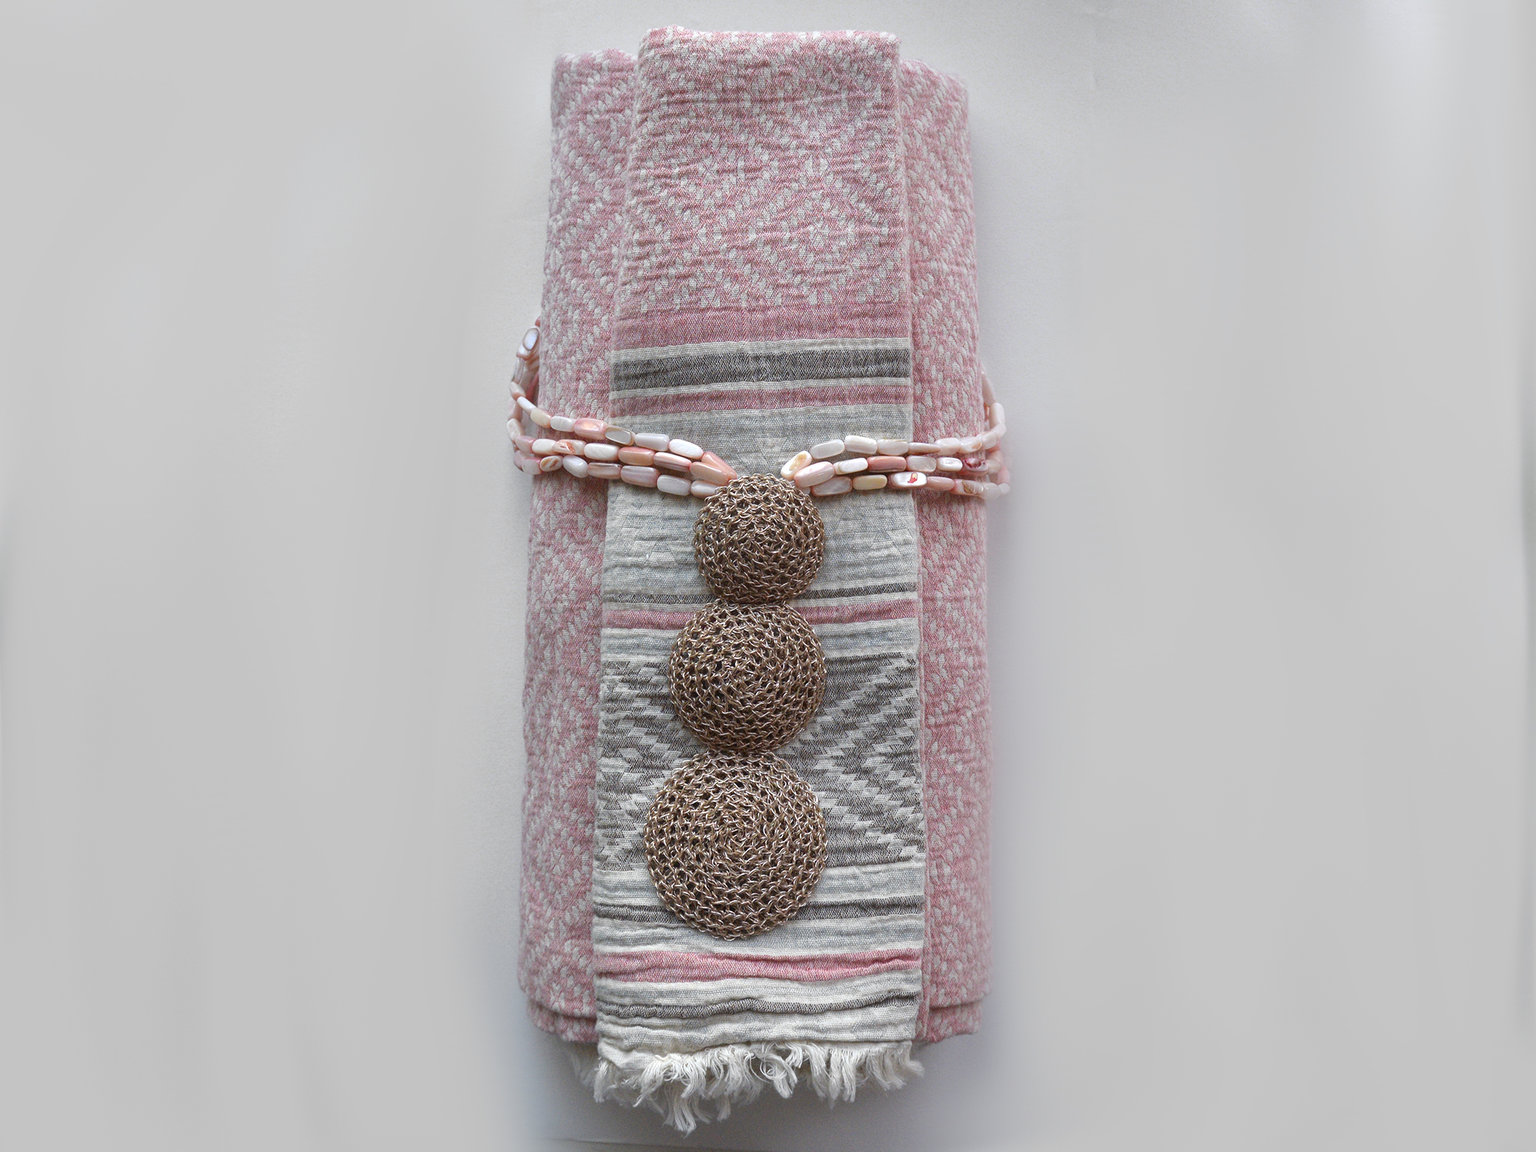 Handknitted necklace with mother of pearl beads